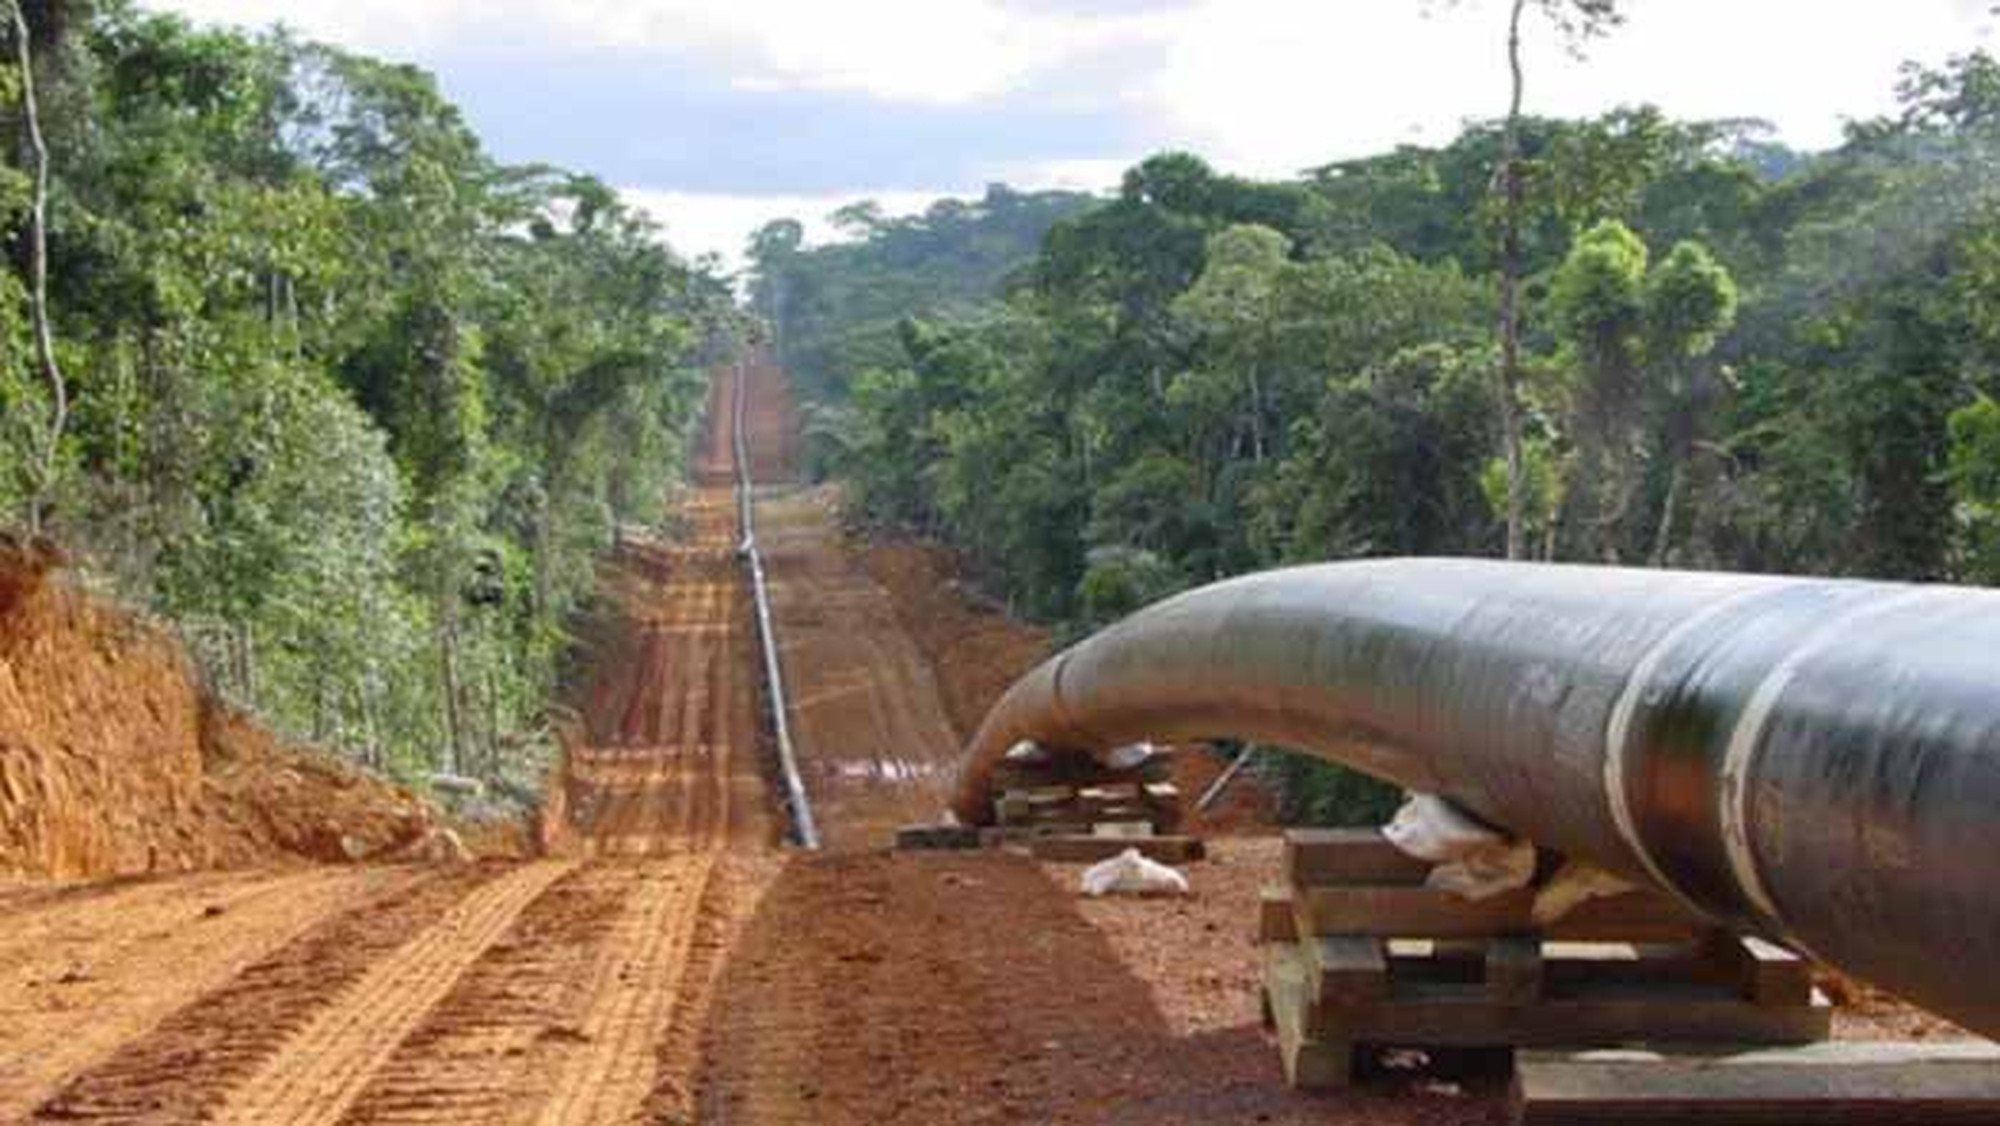 The East African Crude Oil Pipeline (EACOP) has seen Western banks pull out of financing the project over environmental concerns. Photo: Handout 